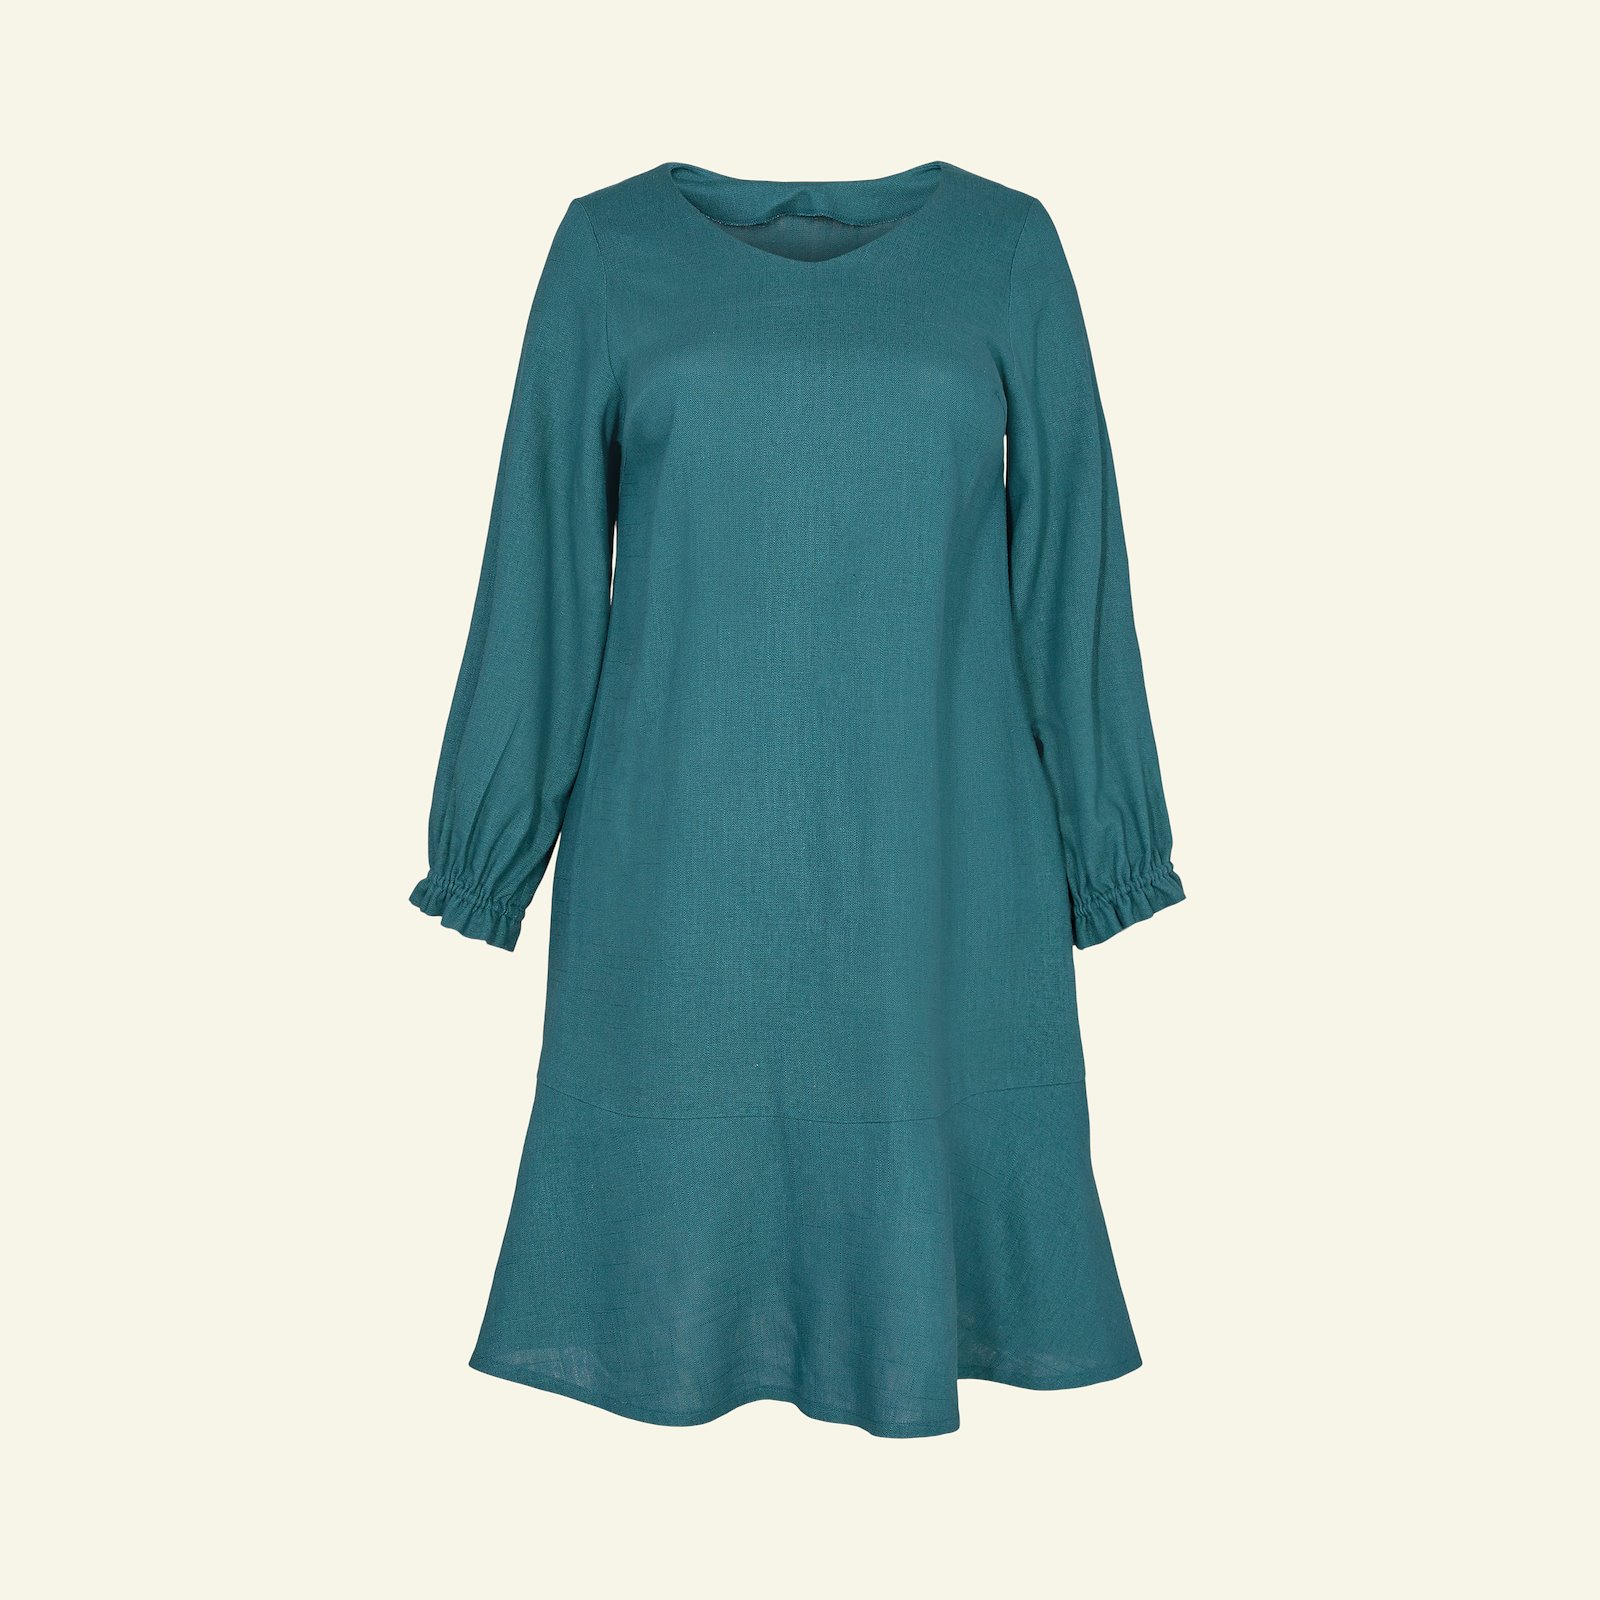 Dress with long and short sleeves, 54/26 p73018_410129_sskit